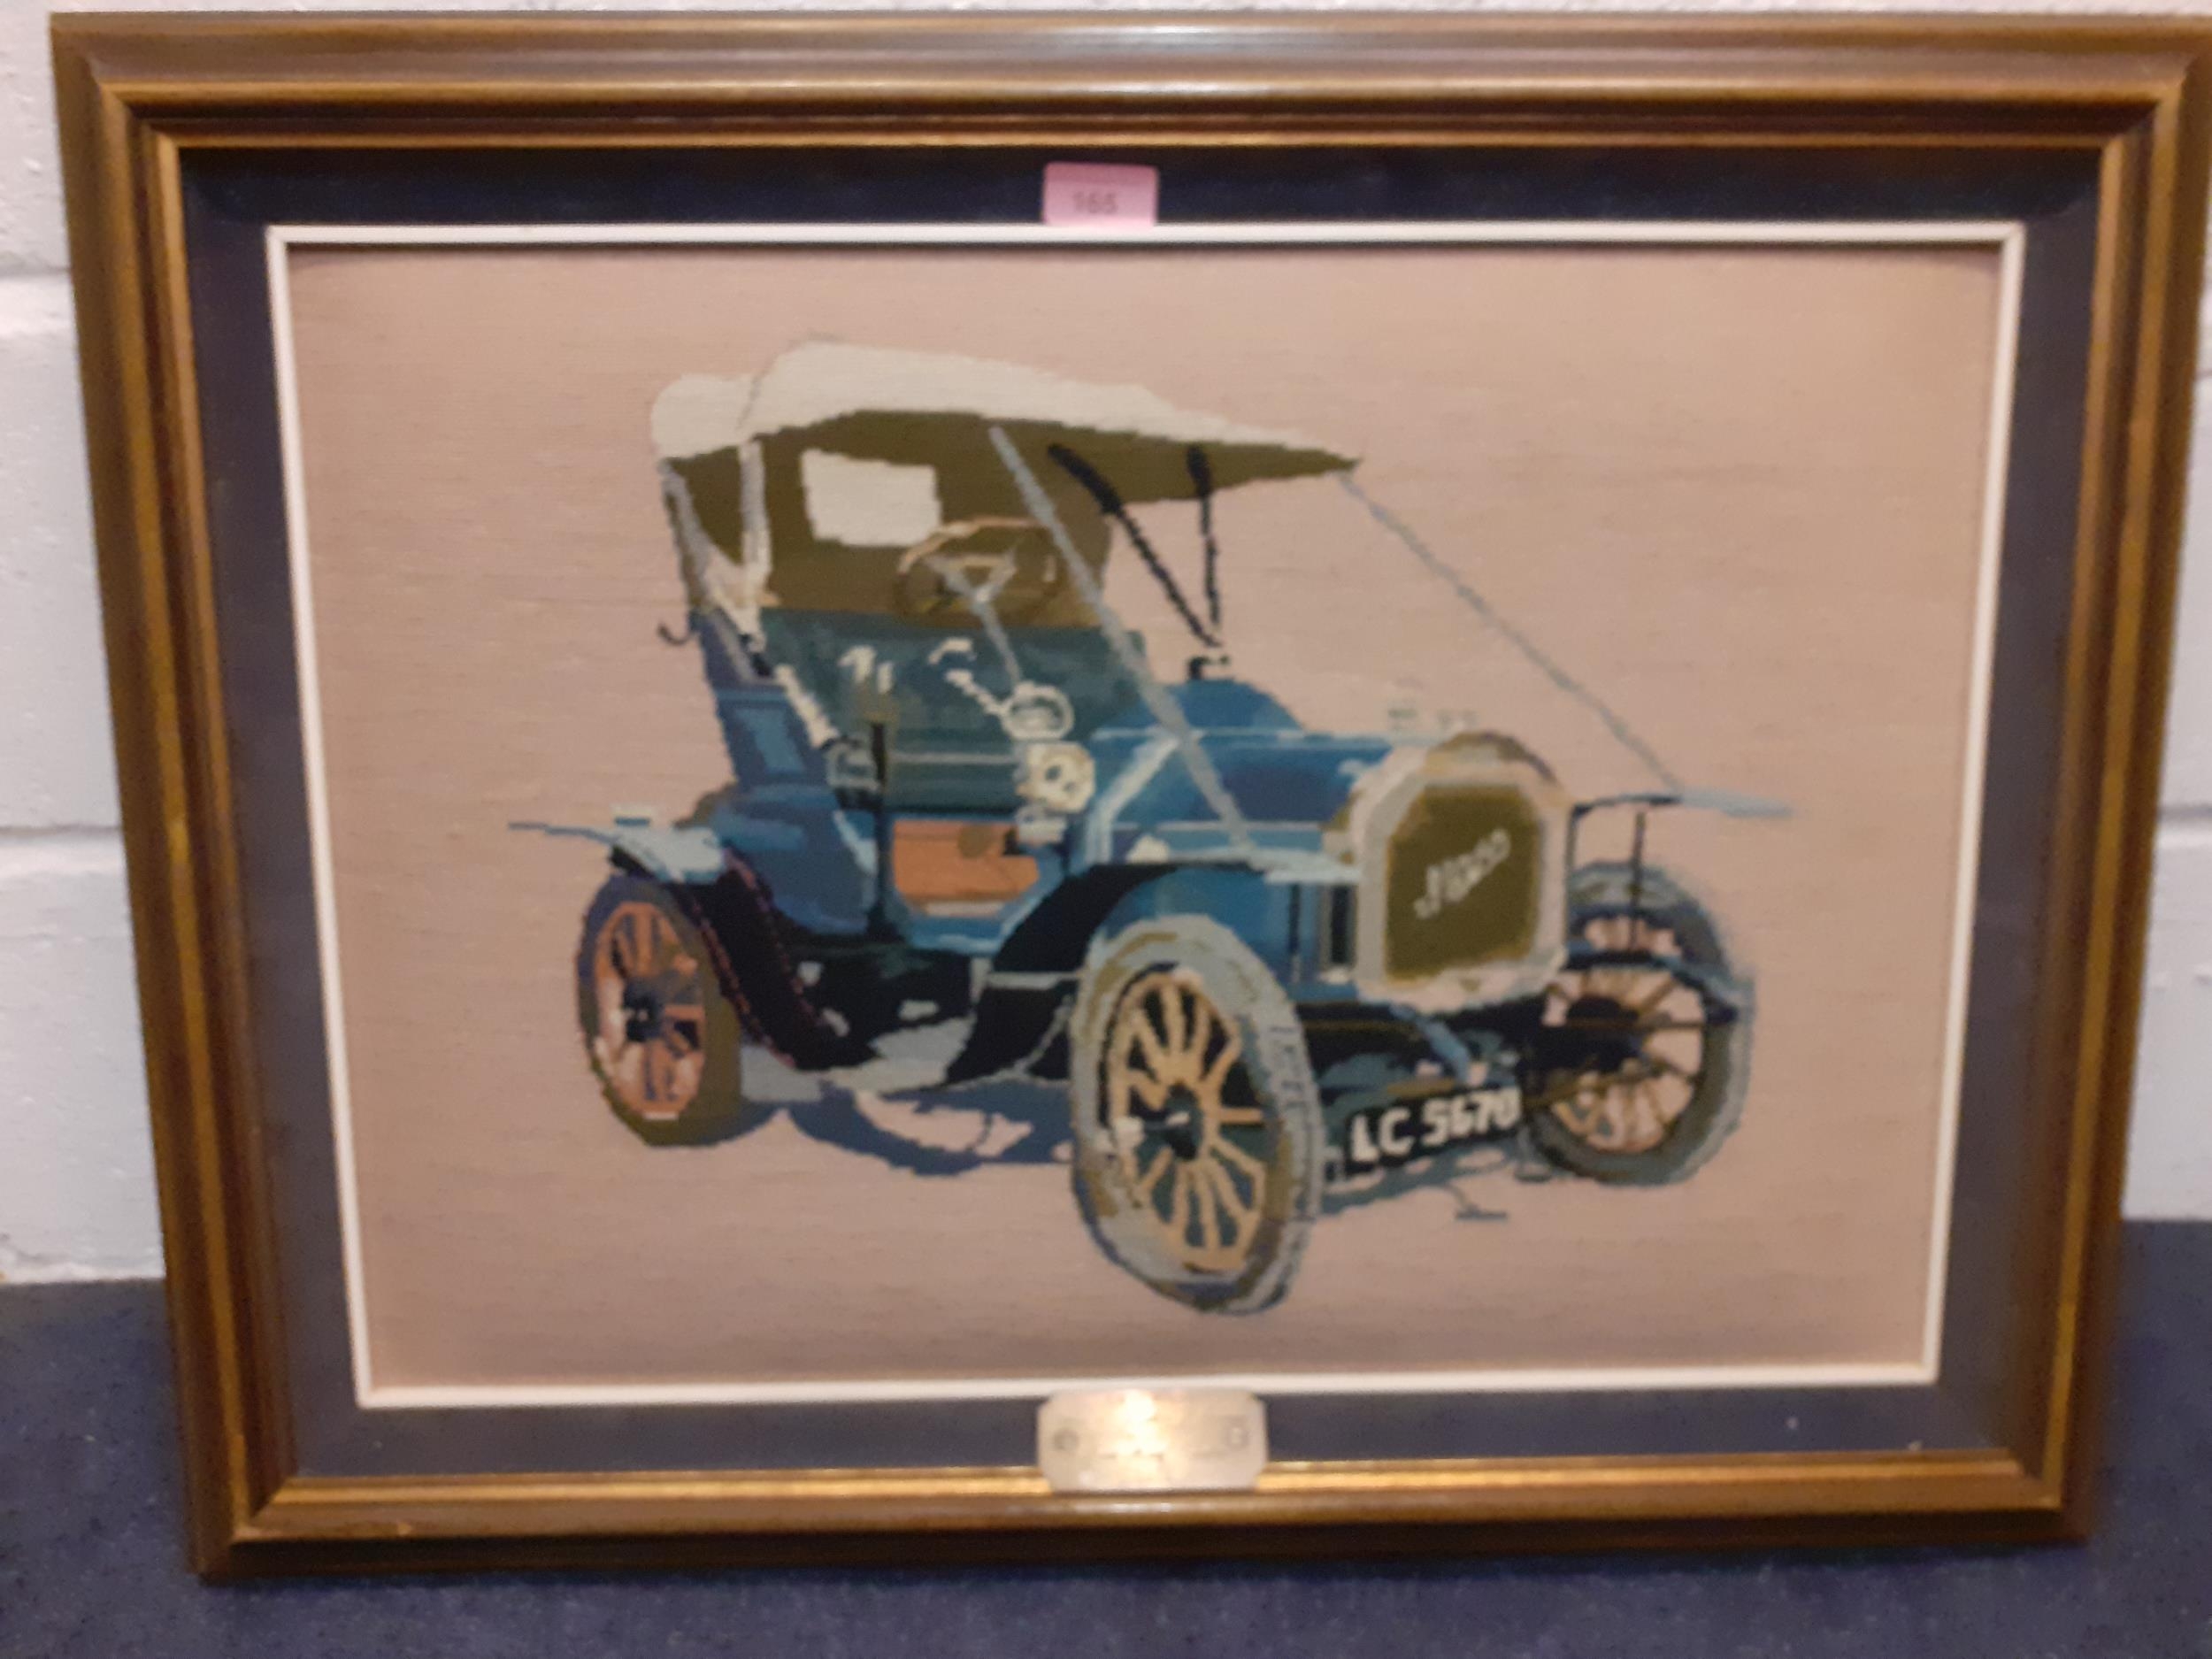 A framed 1979 woollen cross stitch picture of a 1905 Mass Motorcar owned by Lytton P. Farman, worked